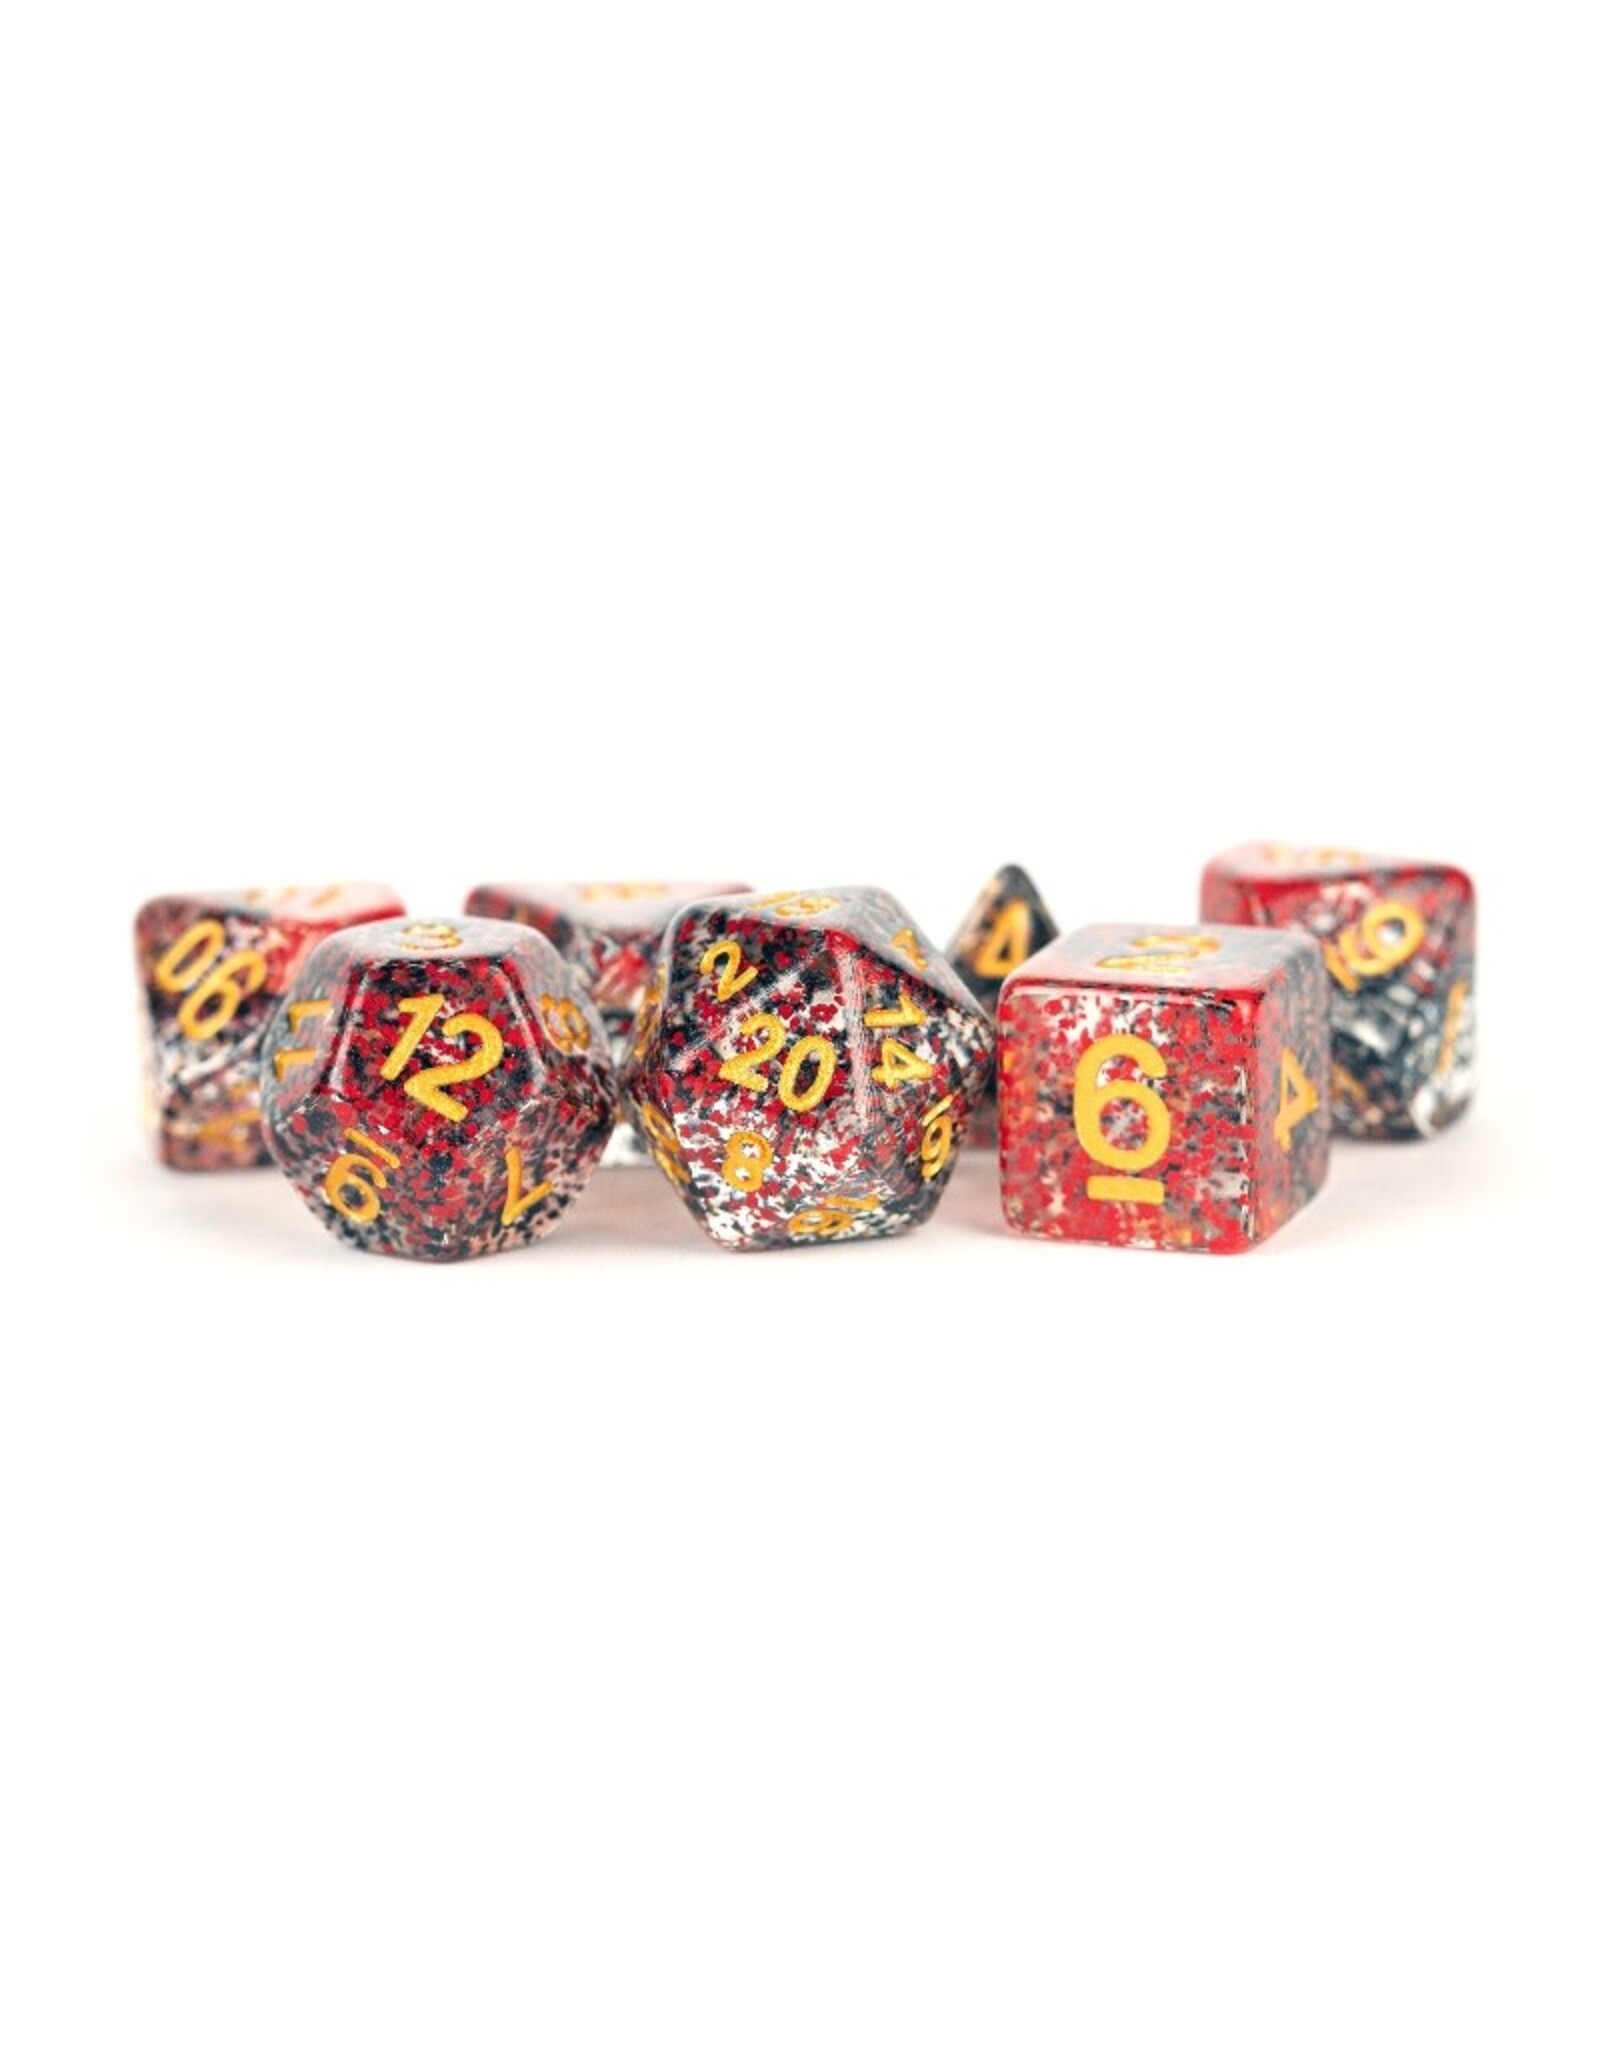 Polyhedral Dice Set: Particle - Red/Black